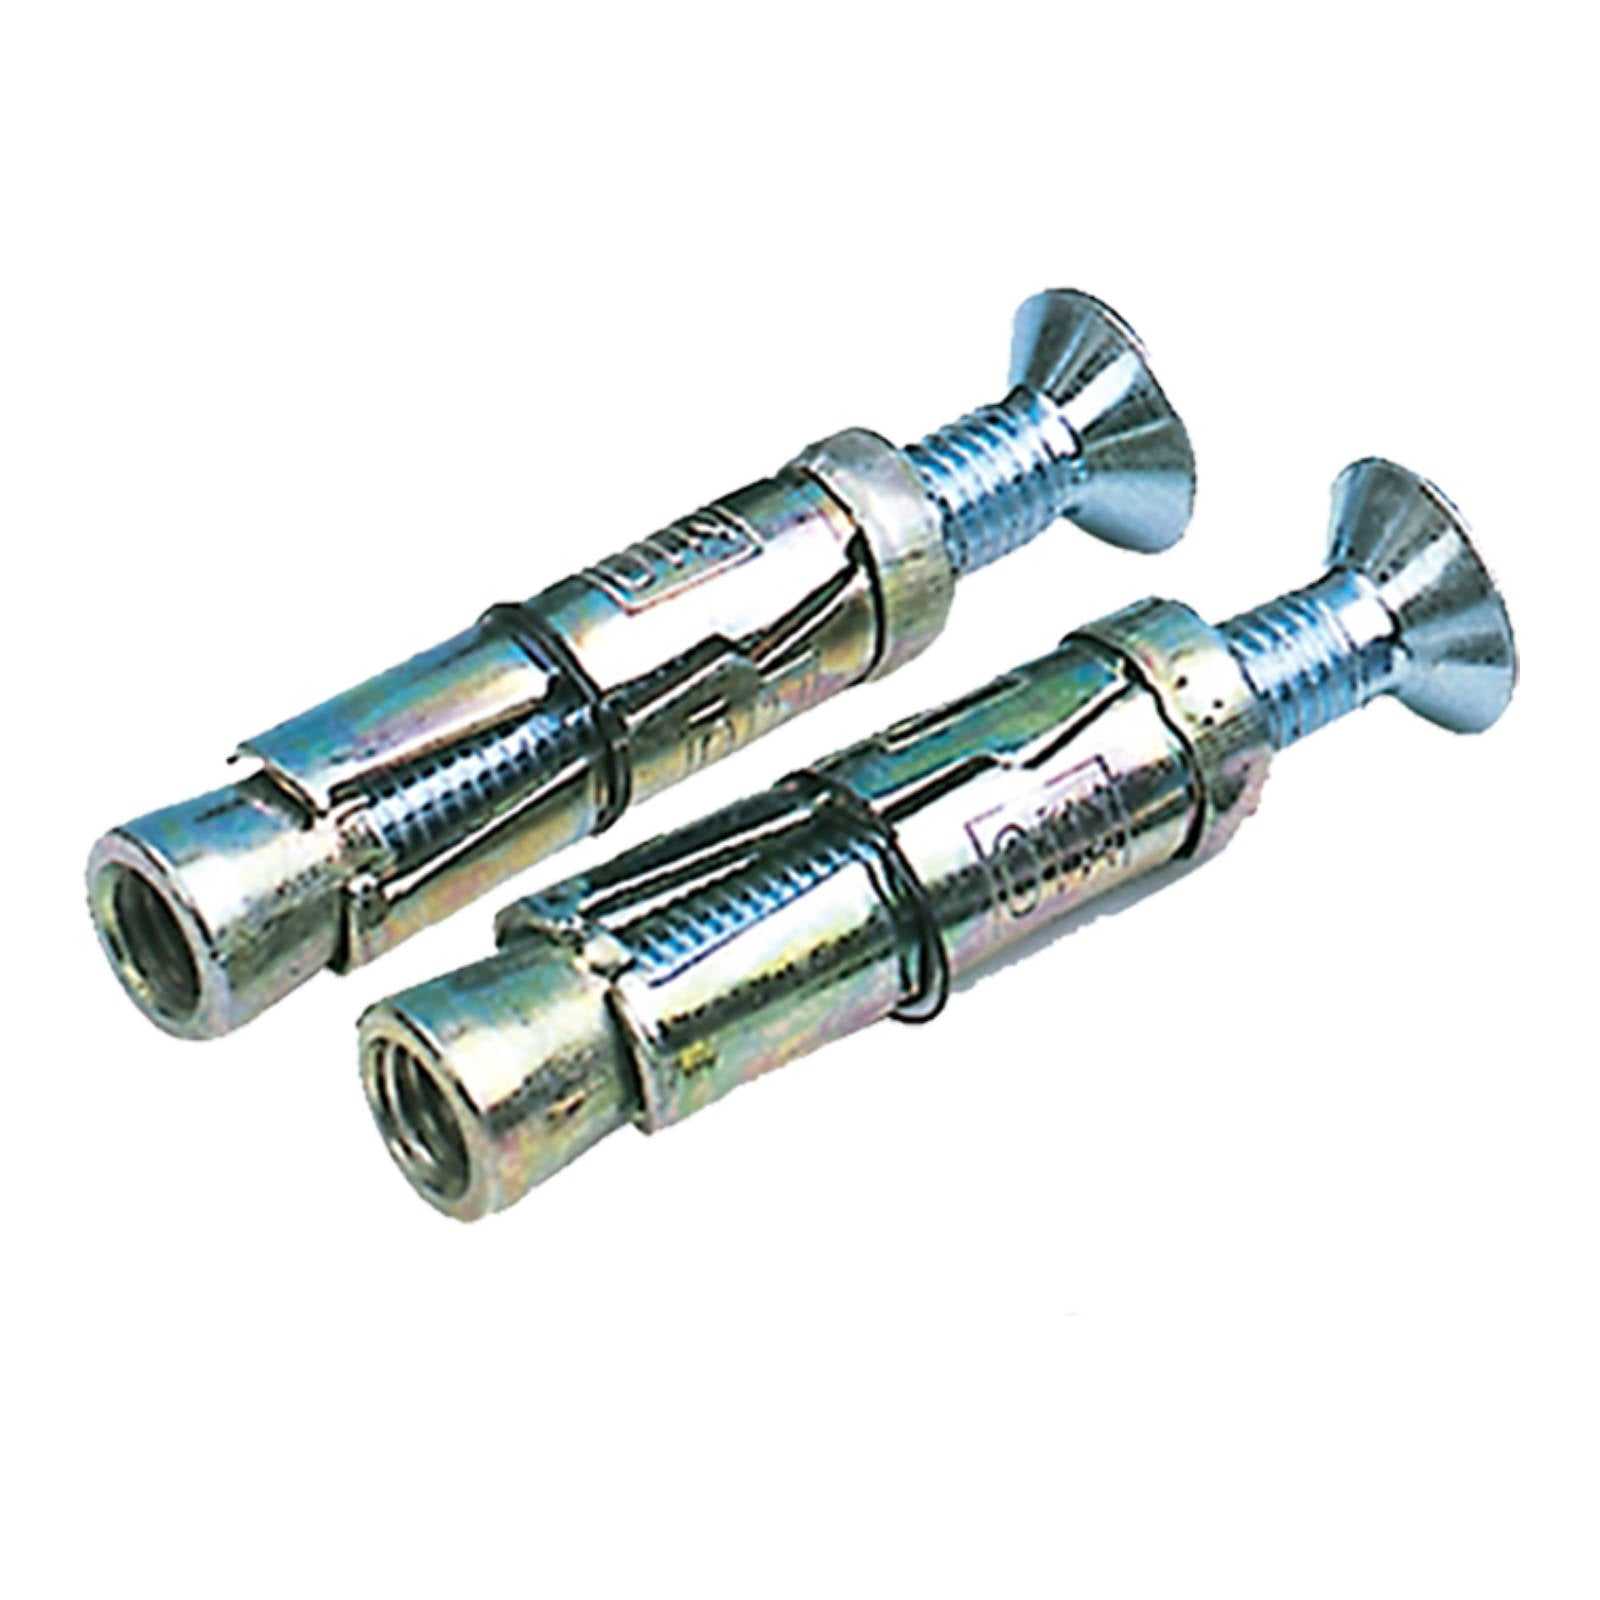 Oxford, Oxford Ground Anchor Replacement Bolts - BruteForce (2 Pack)